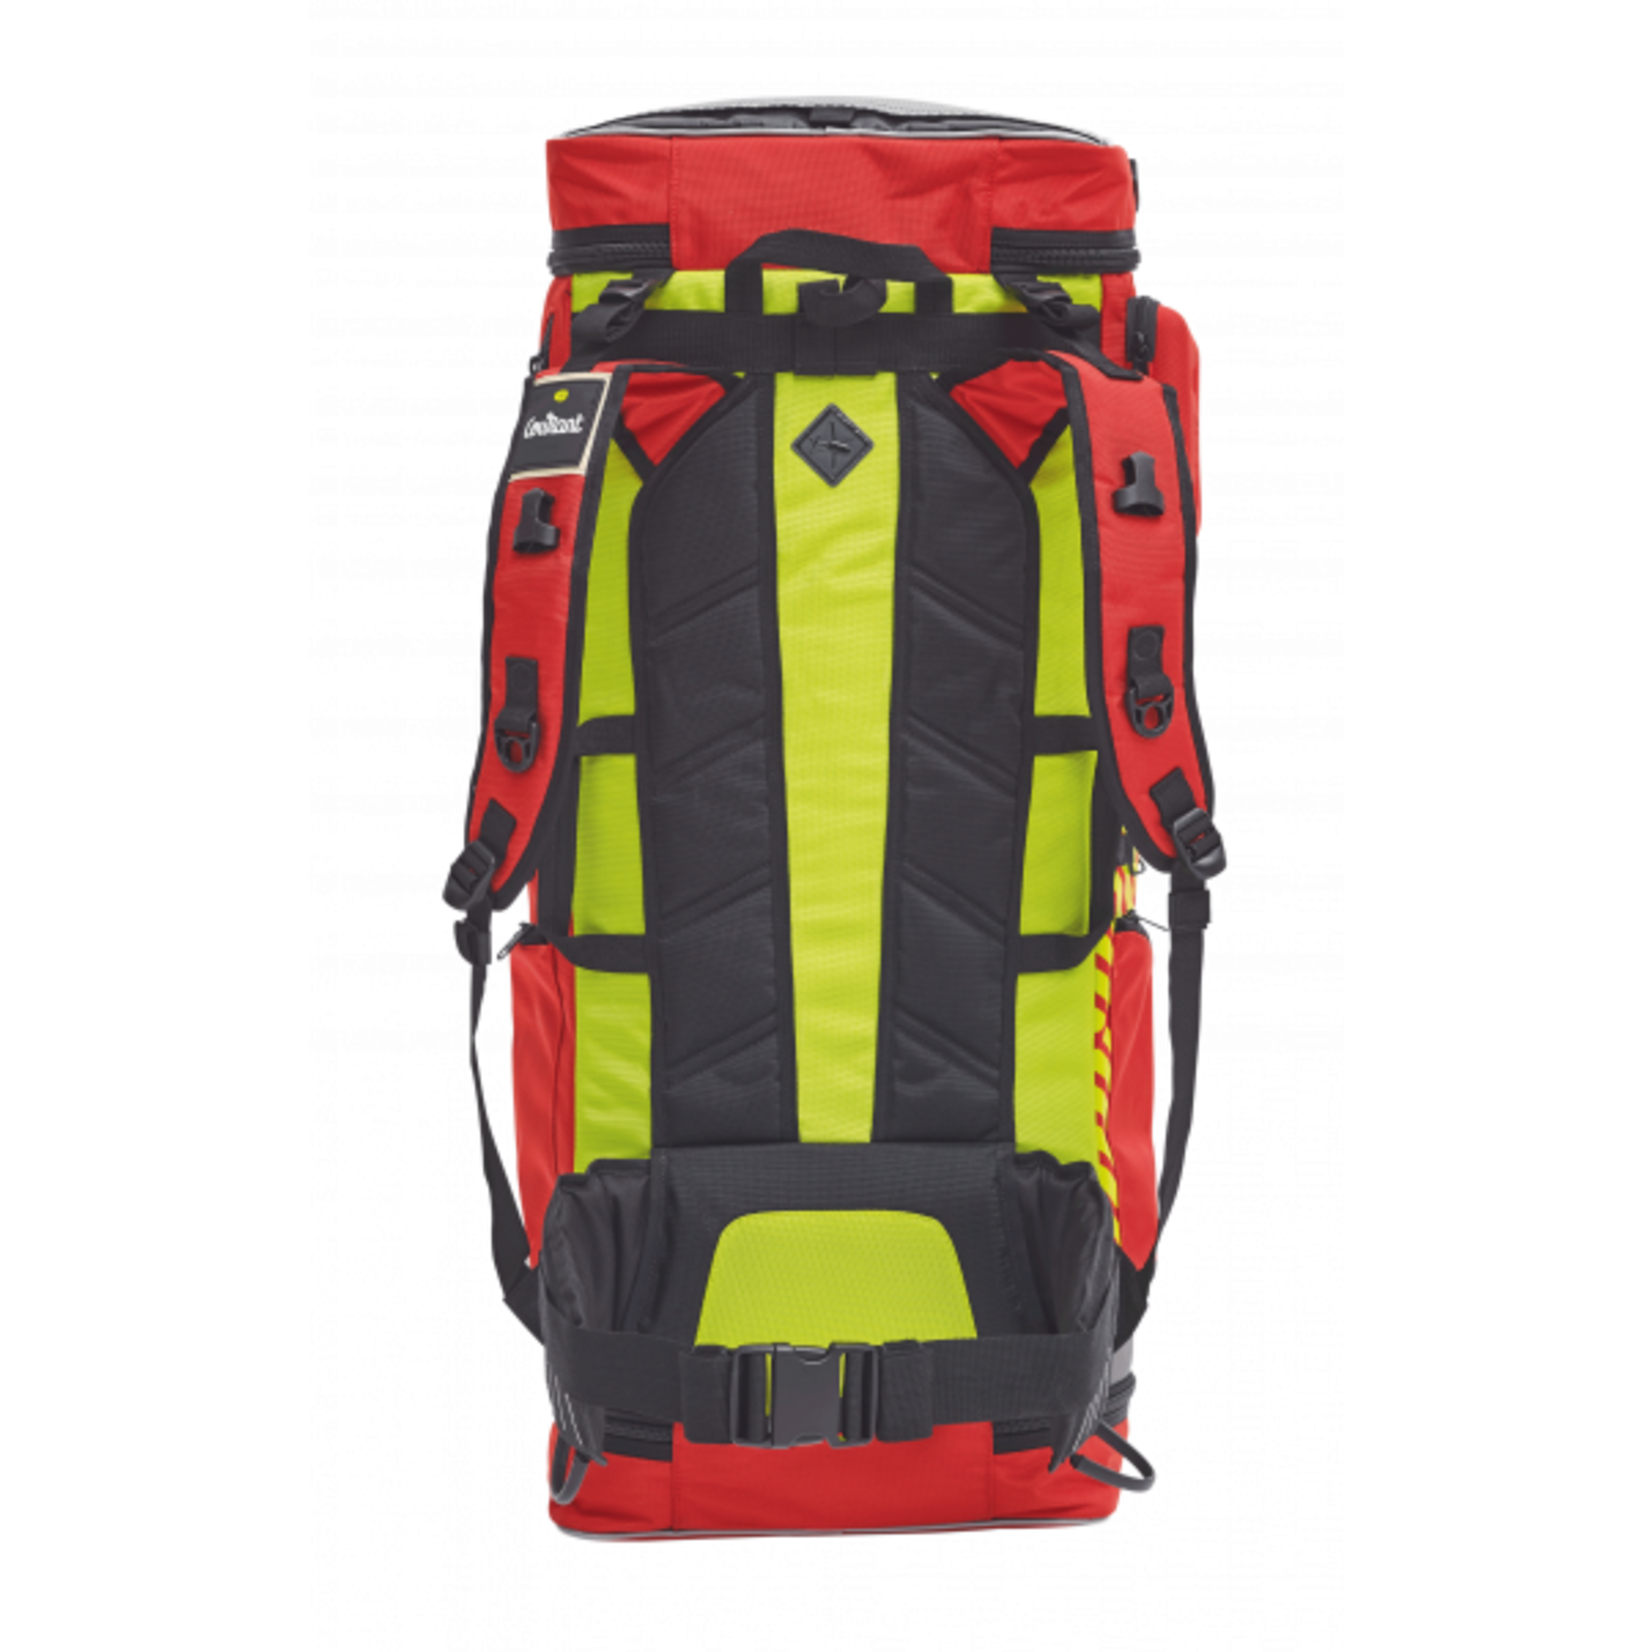 Courant Courant Cross Pro rescue red XL - 75 L  (Cross Belt included)